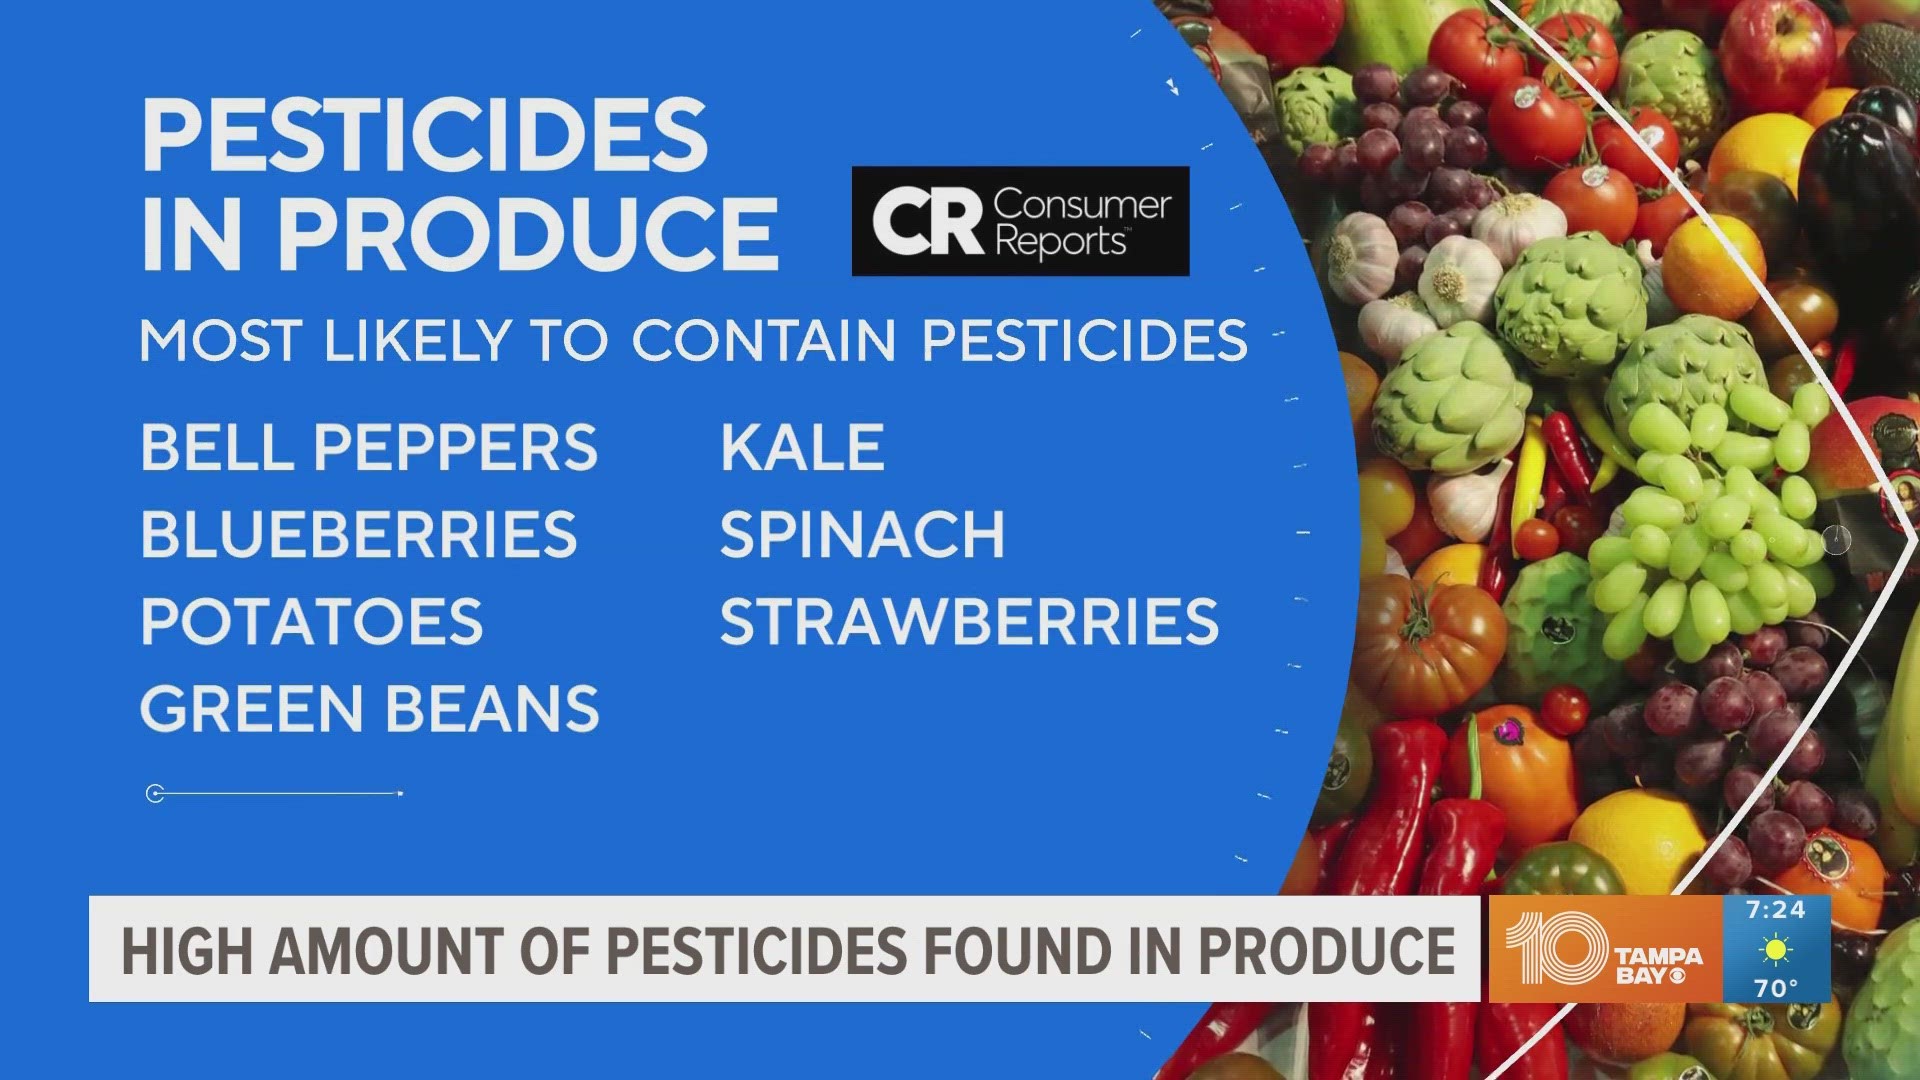 Consumer Reports says there's a significant amount of pesticides found in about 20% of fruits and vegetables.